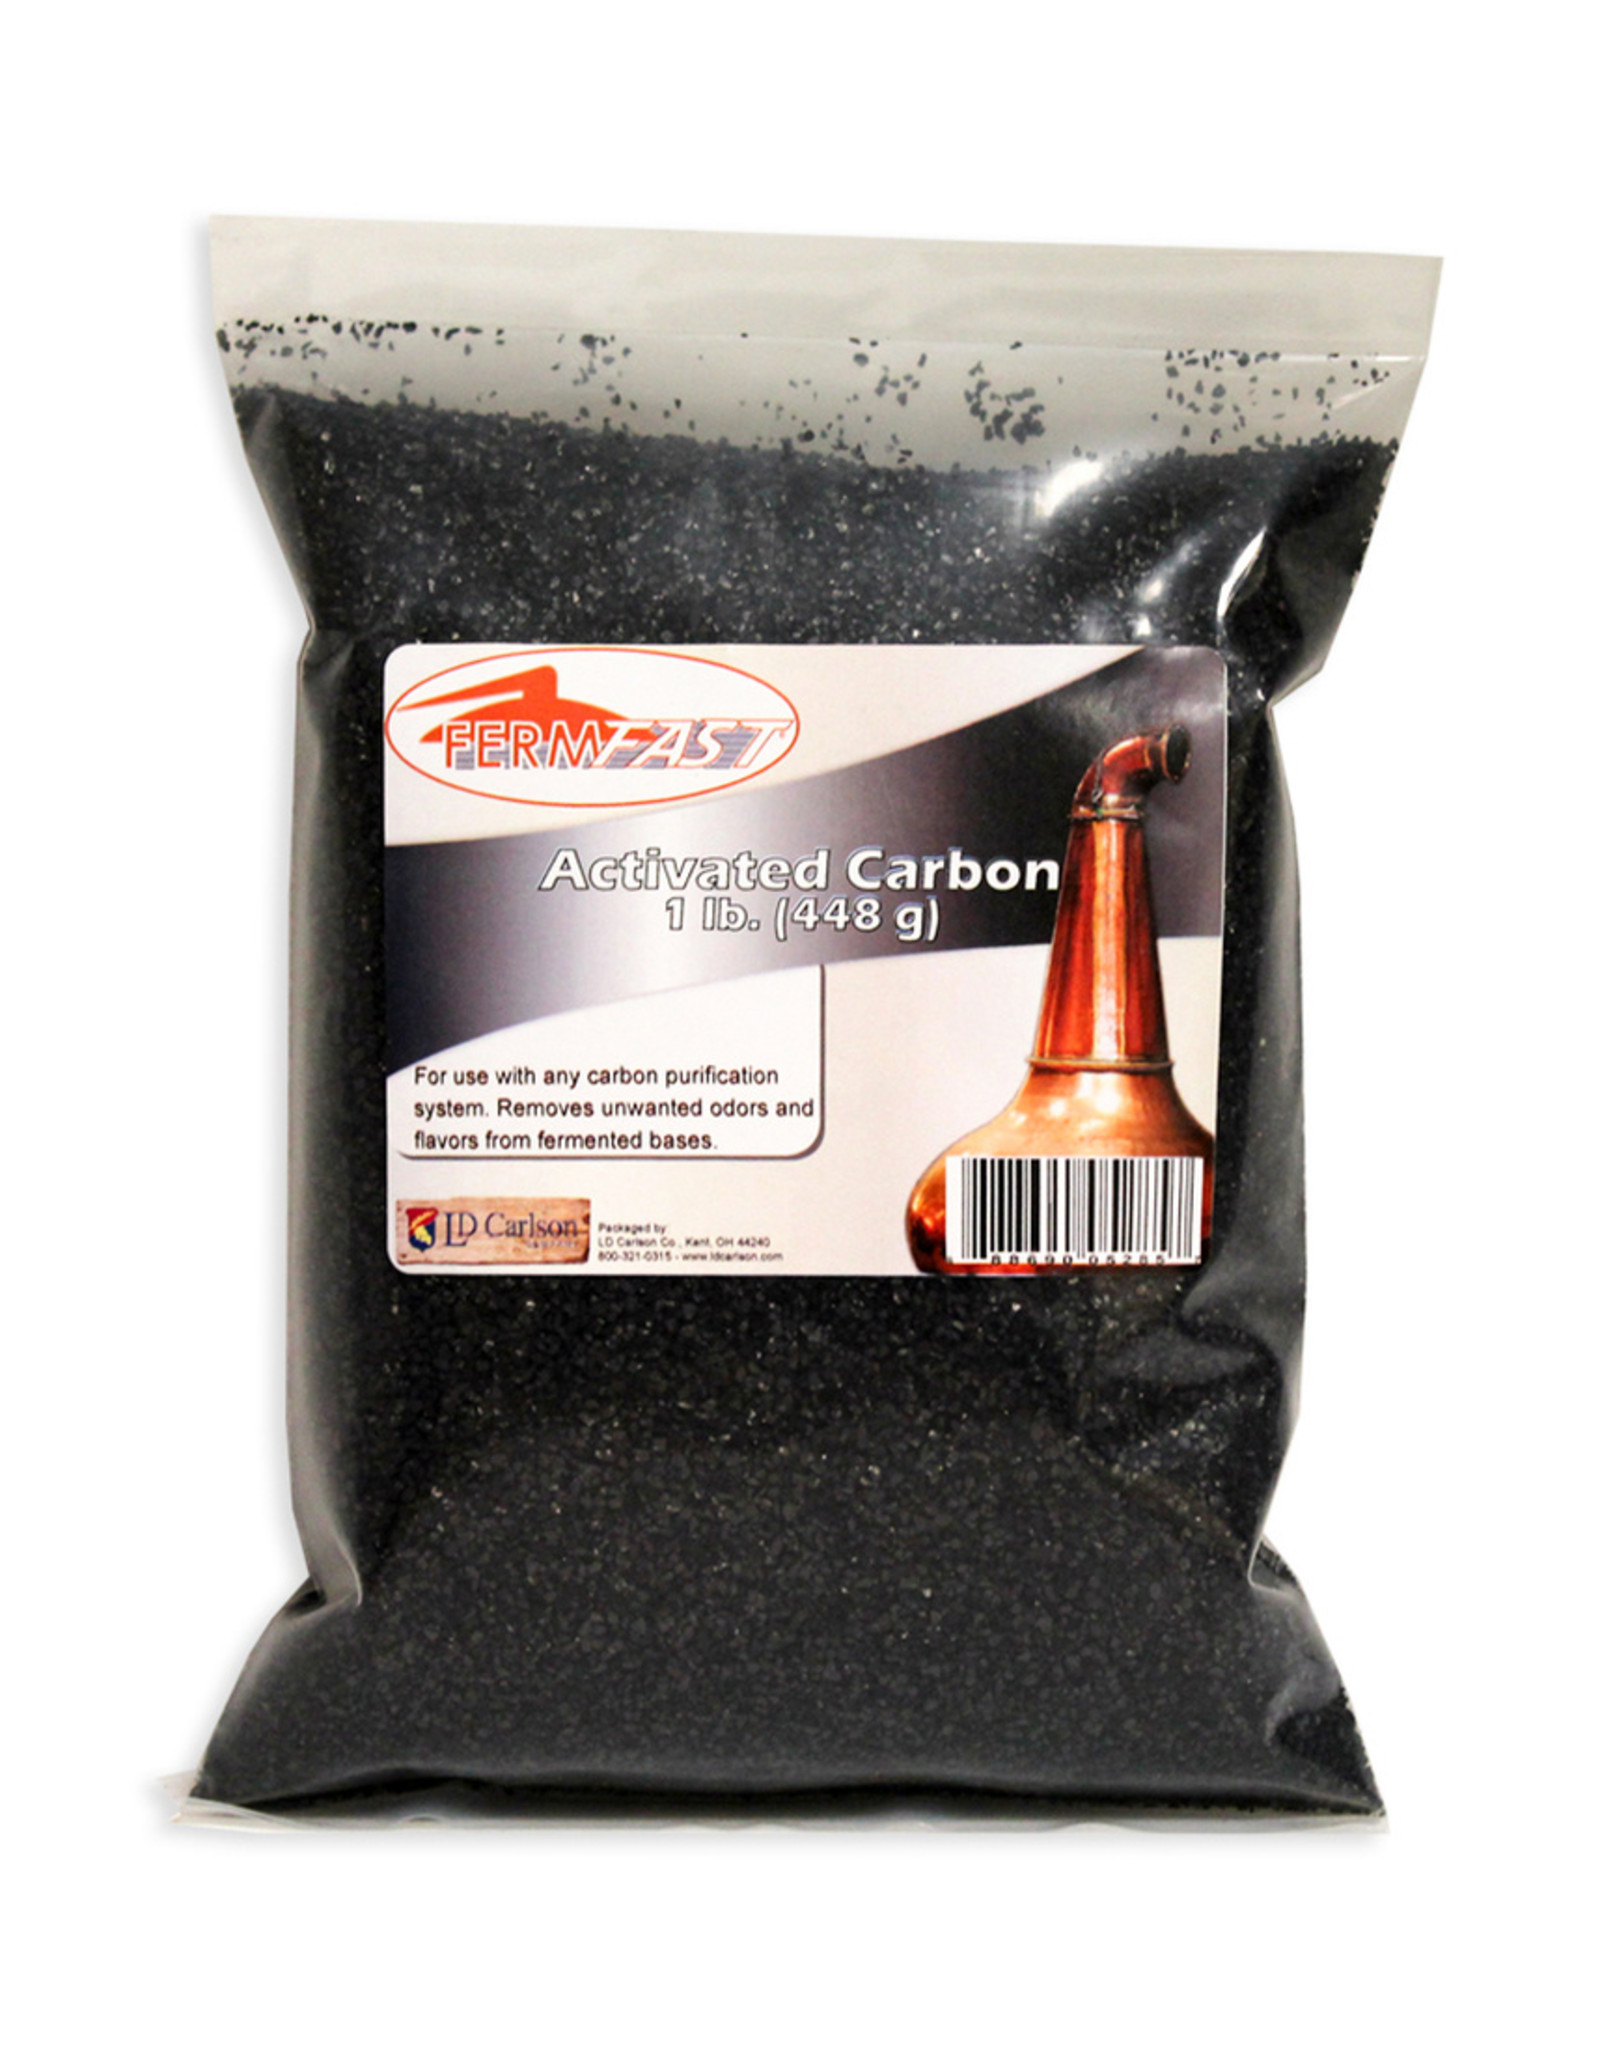 Fermfast Activated Carbon